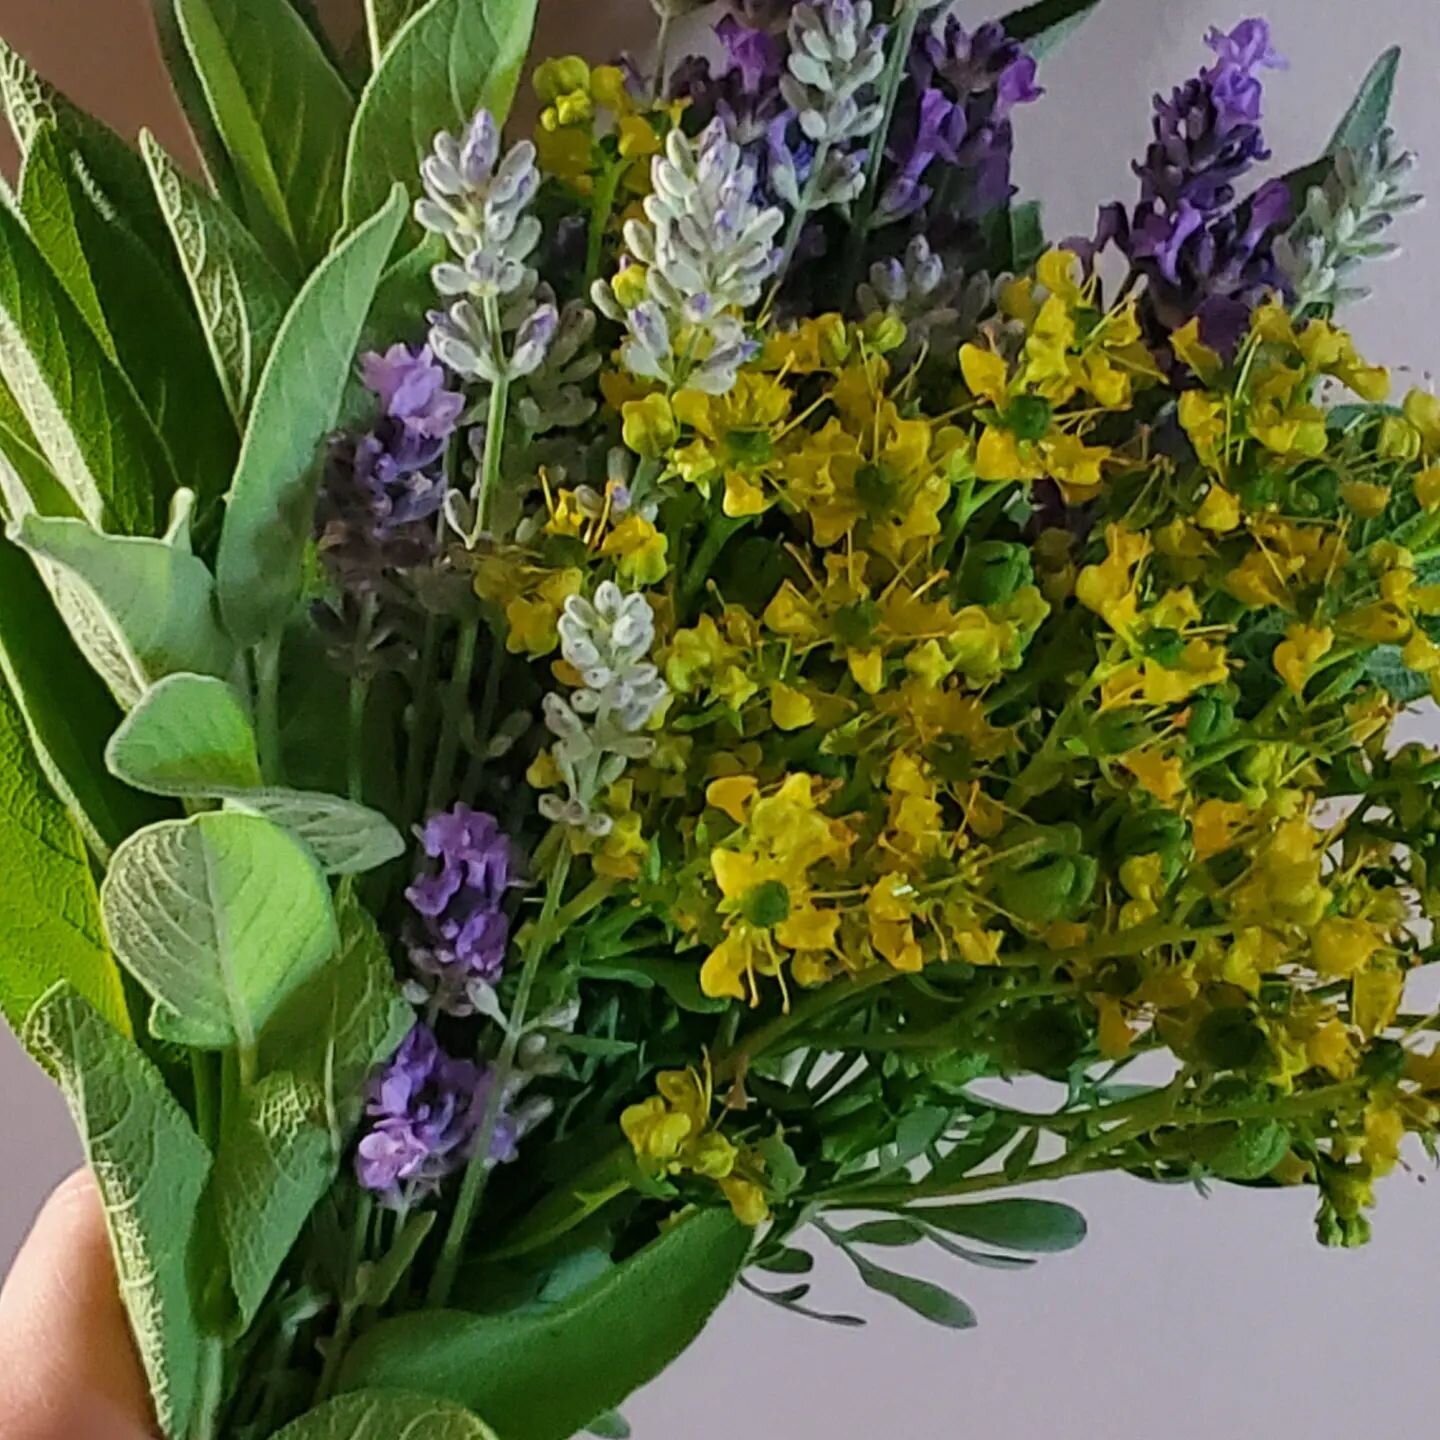 It's smudge wand season. I learned this from @venicemke @alicesgardenmke. This year lavender, rue, sage and mugwort have been blessing me with their presence and their medicine. Check out the photos and video. 

For two years in a row now i got the m